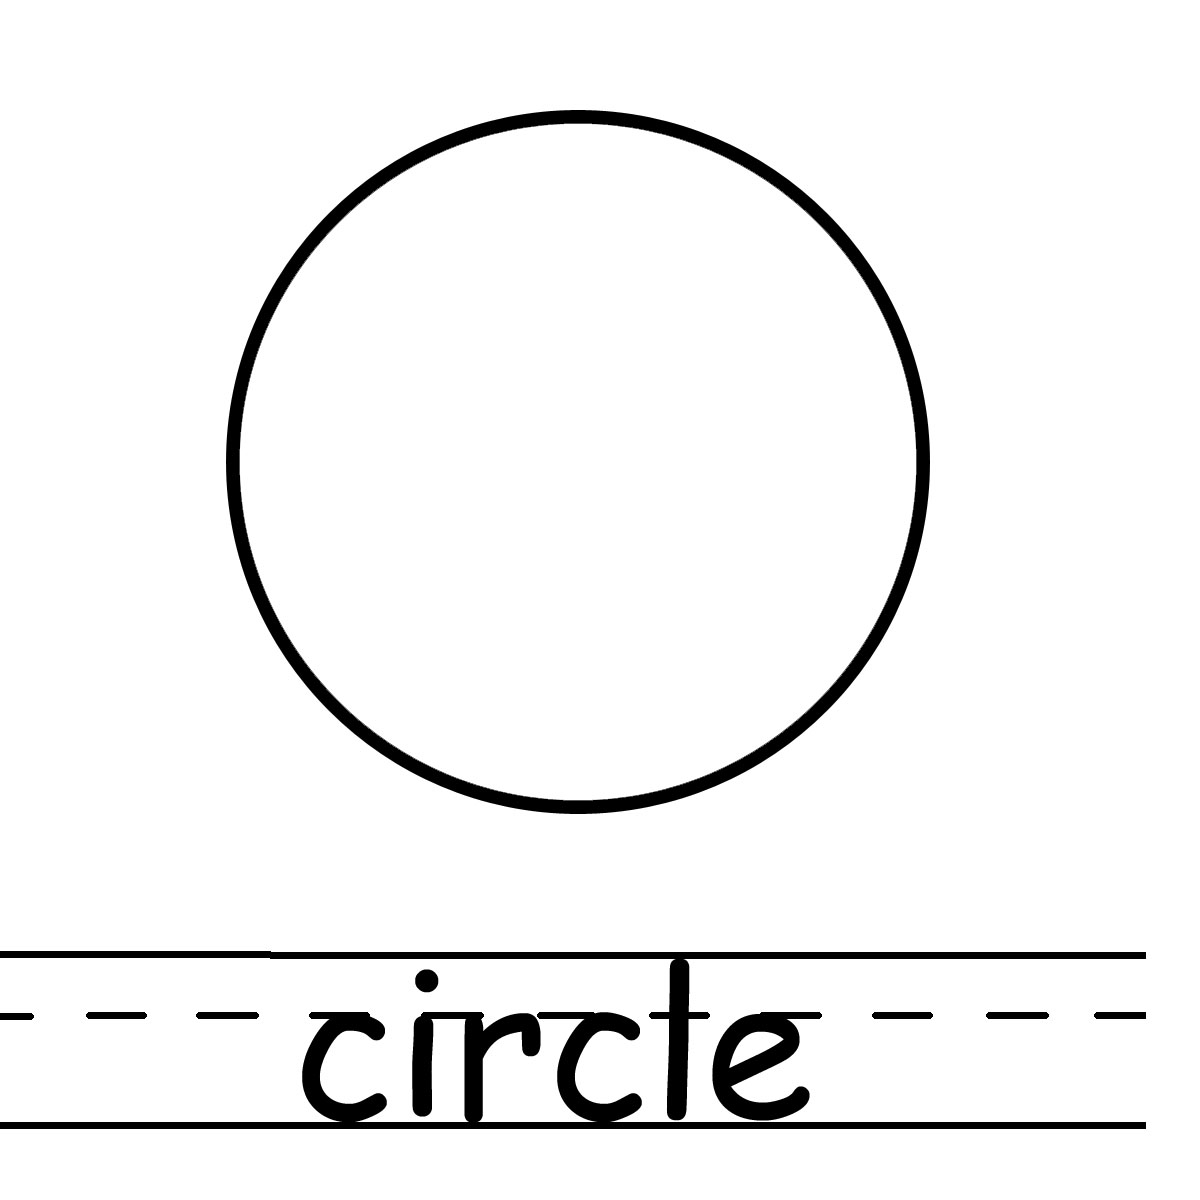 Free clipart circle outline